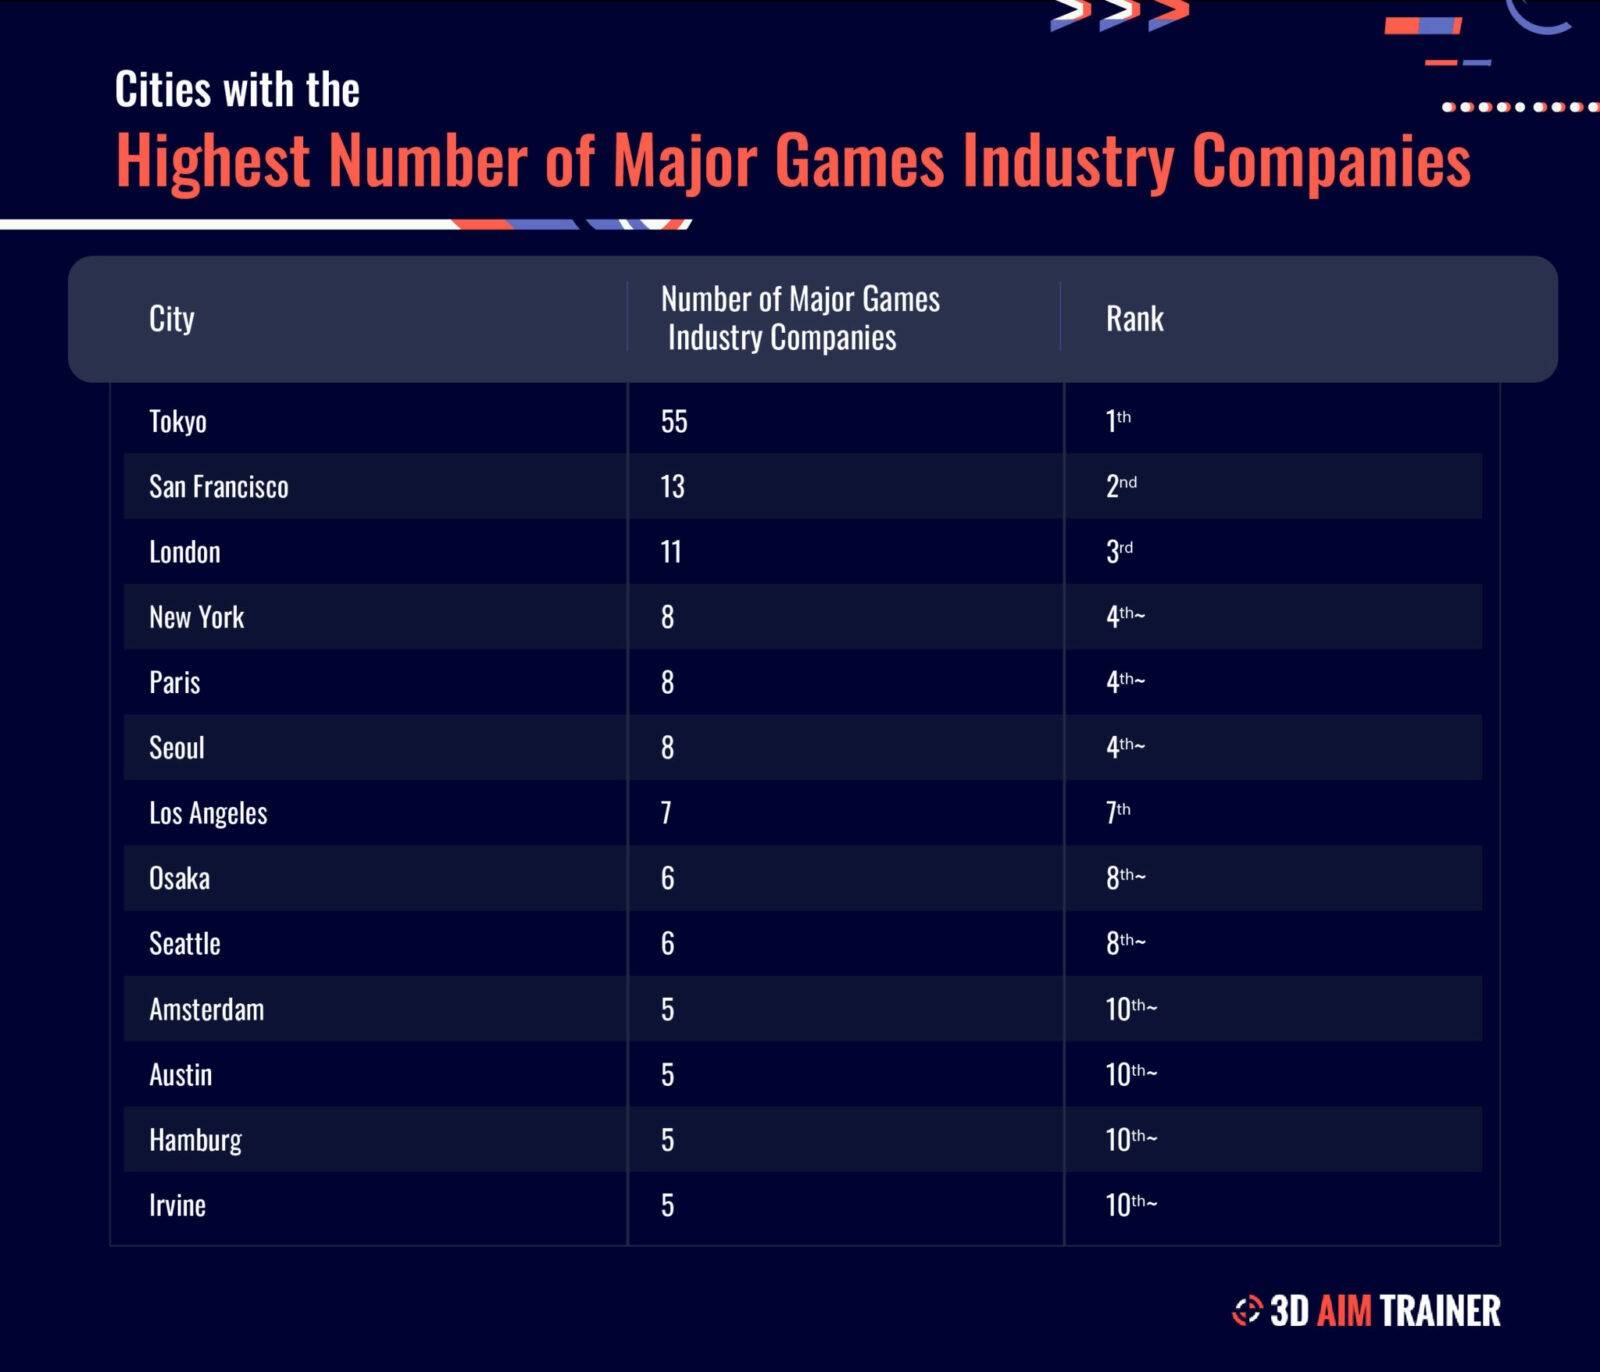 Highest Number of Major Games Industry Companies, 3D Aim Trainer